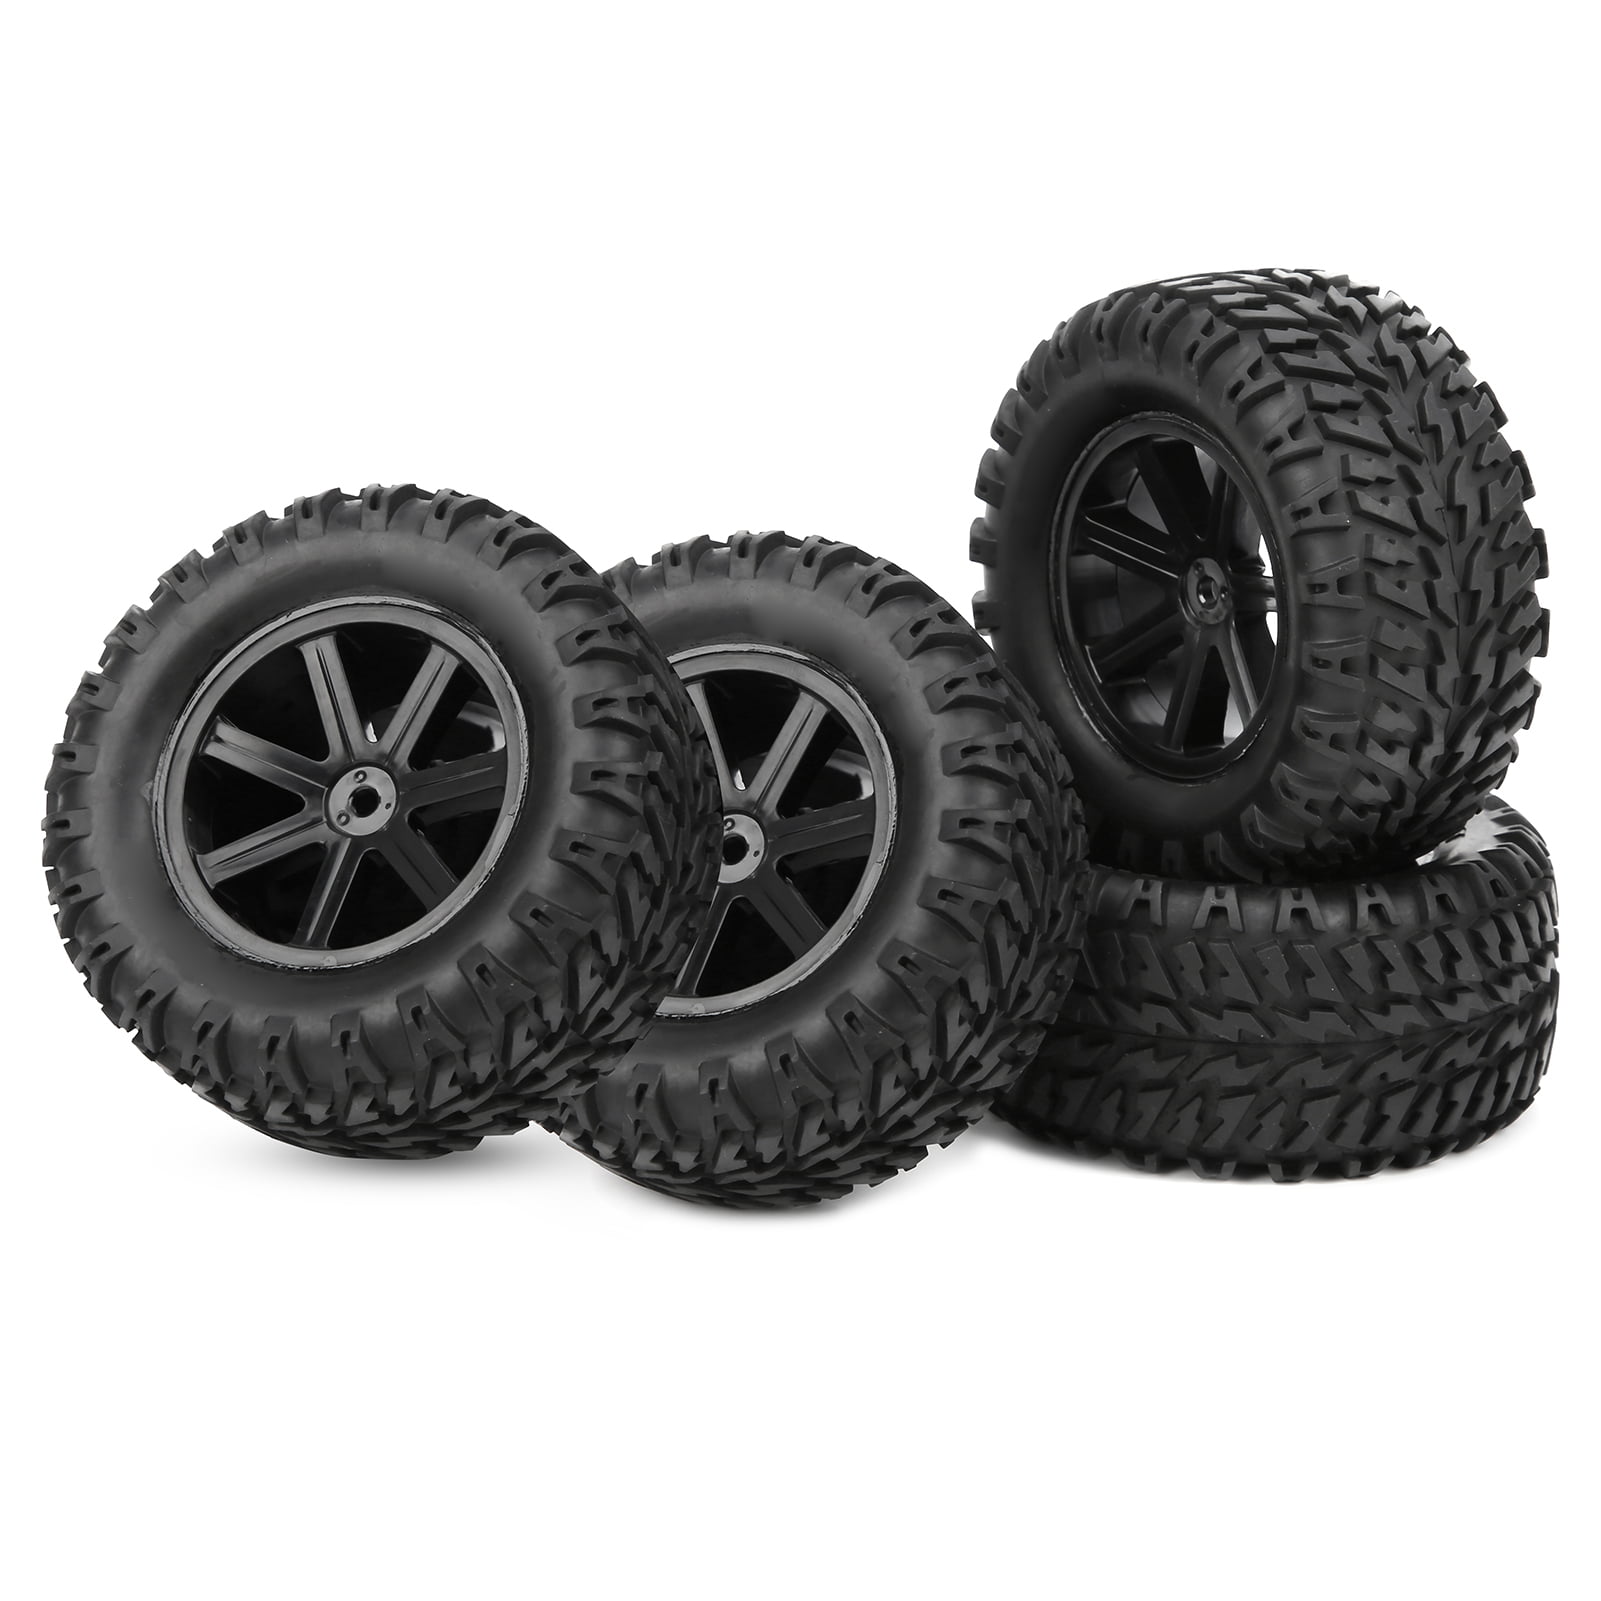 Shaluoman 12-Spoke Plating Hub Wheel Rims with Soft Rubber Tires for RC 1:10 On Road Car Color Black 